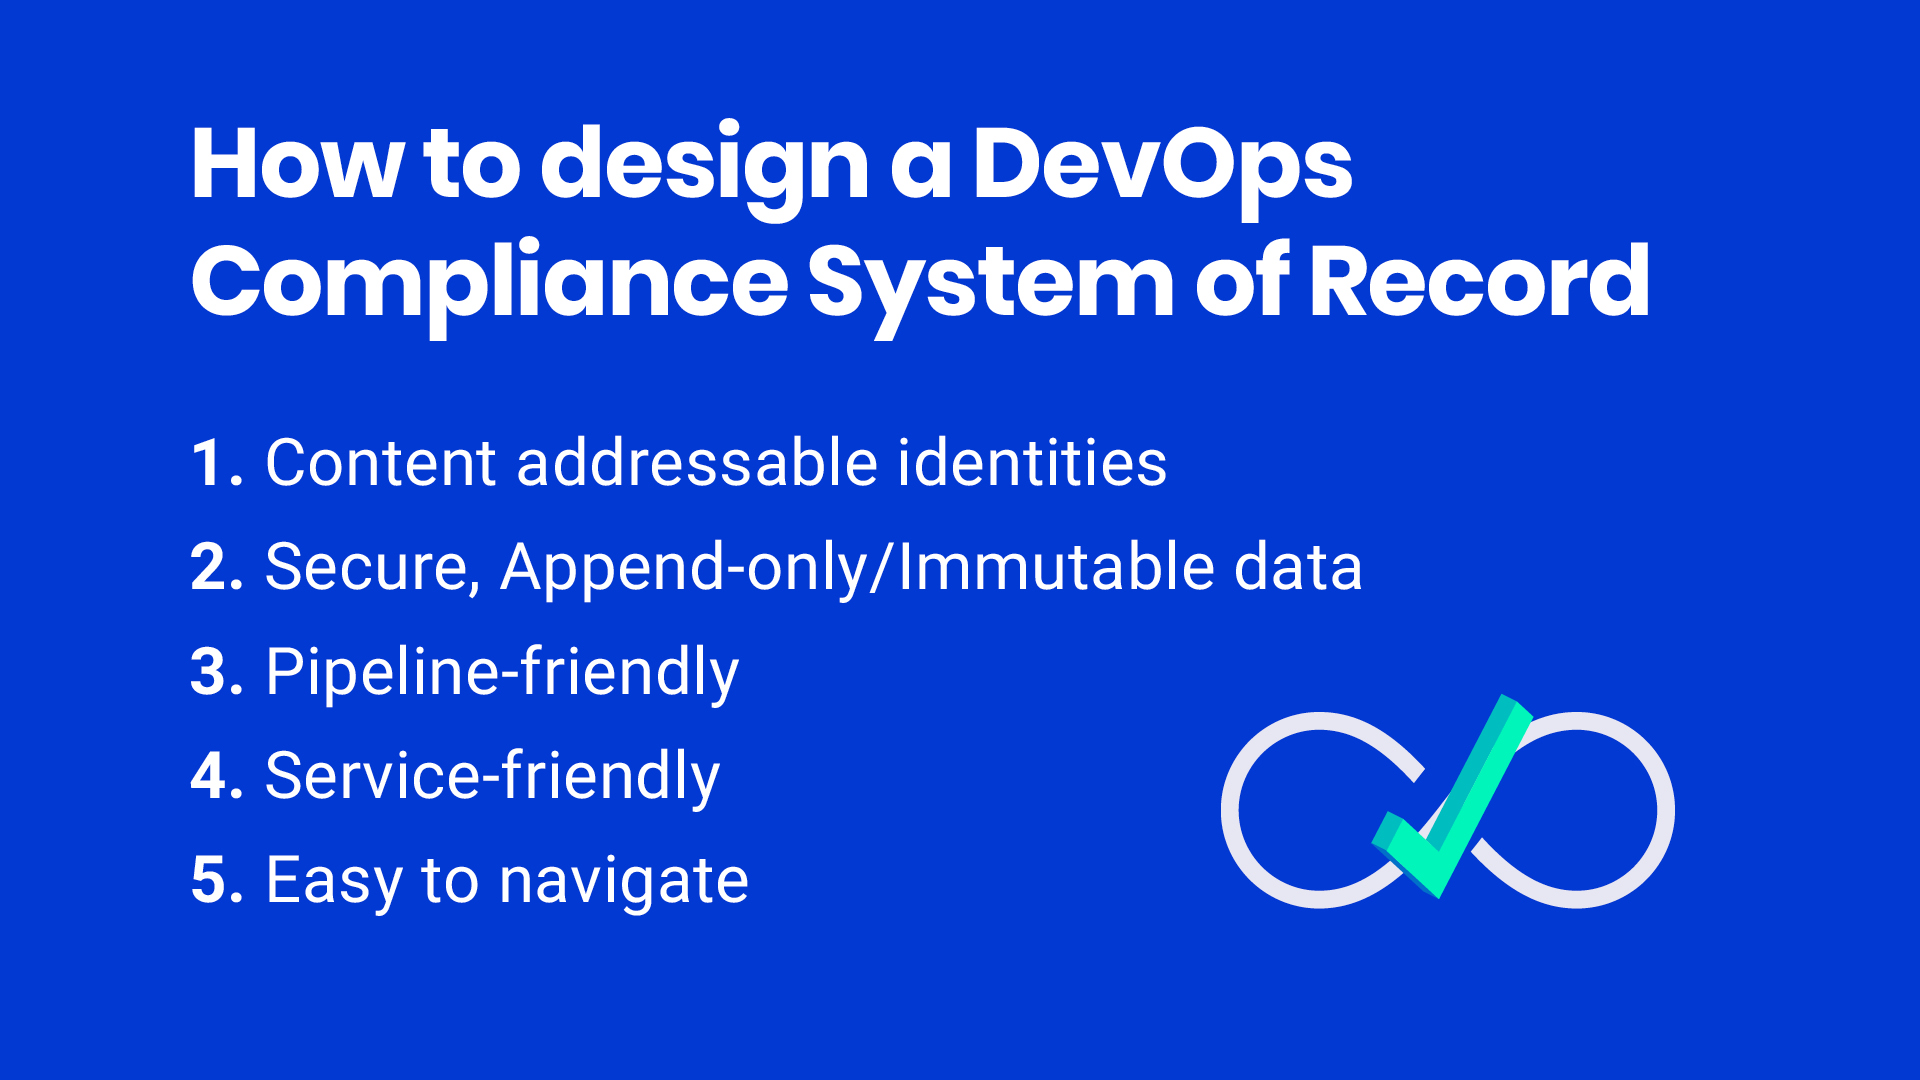 How to design a DevOps Compliance System of Record list merkely